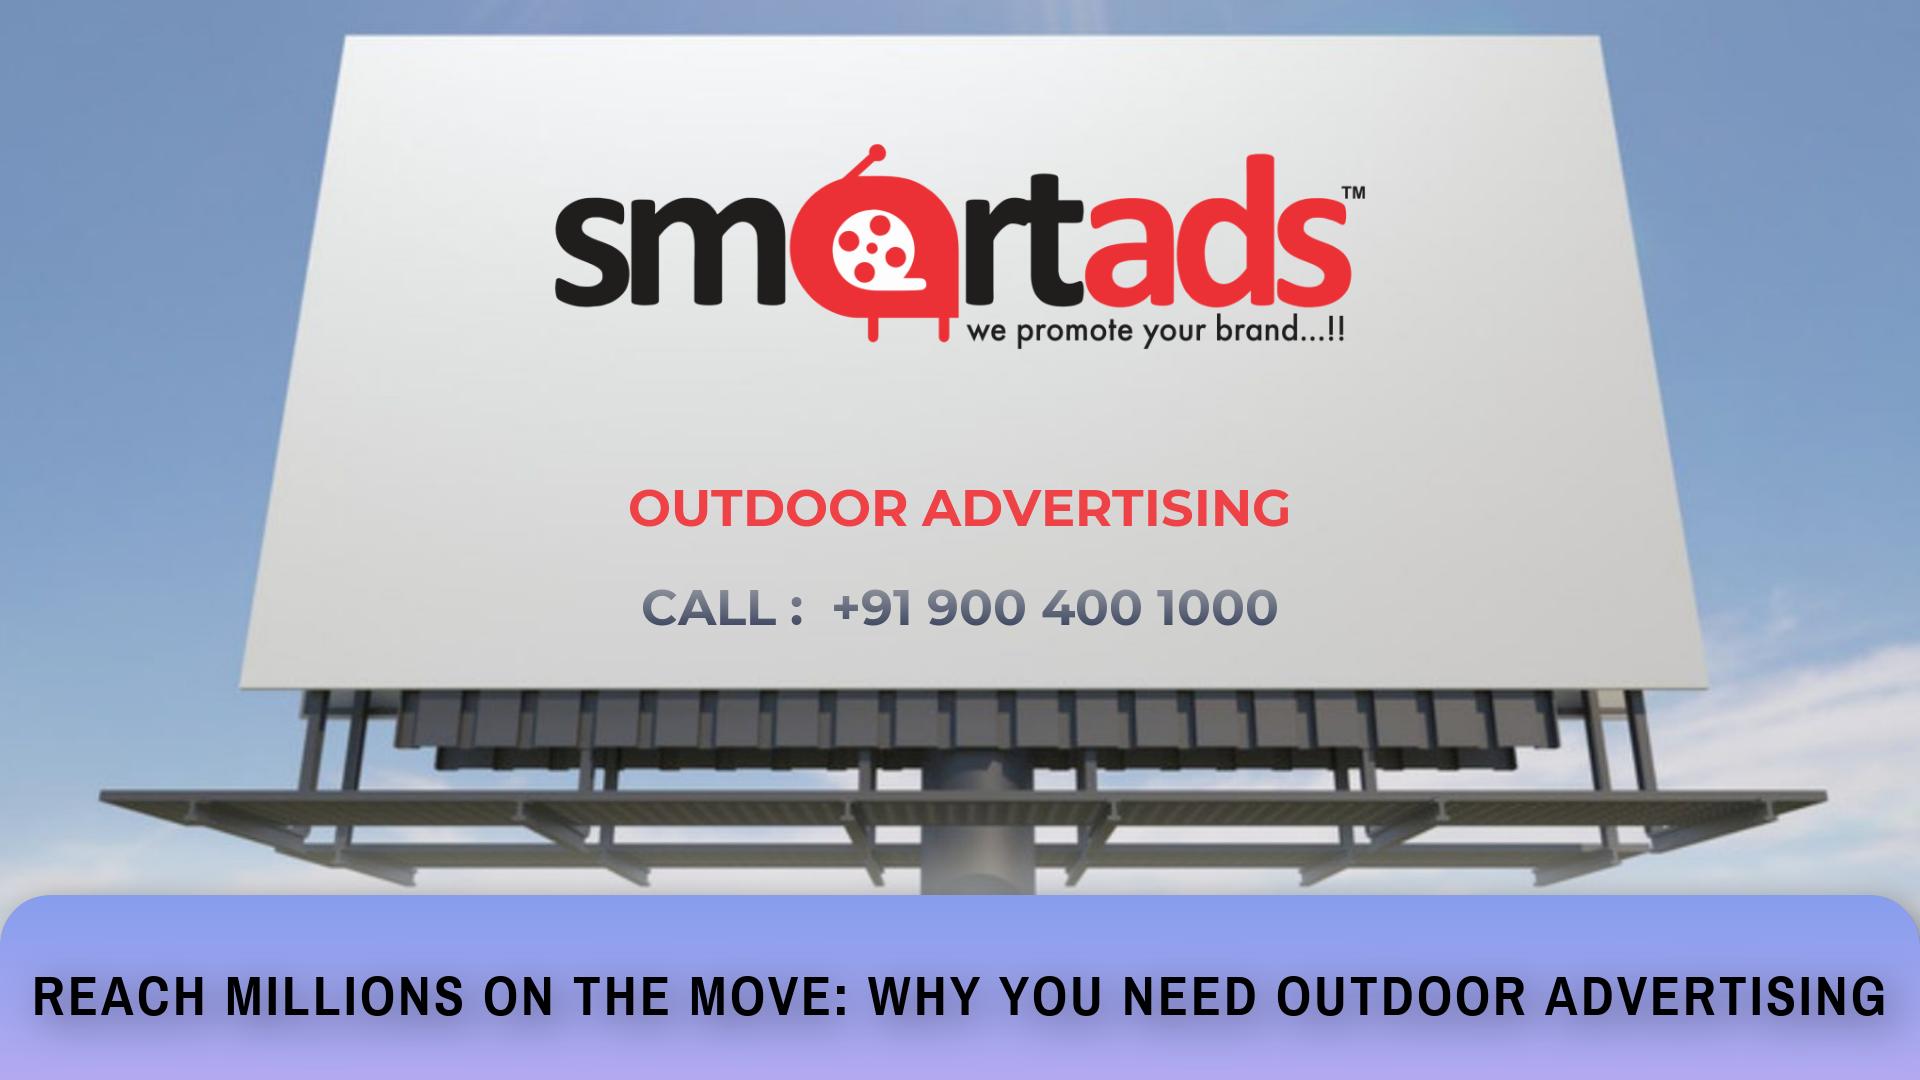 Reach Millions On The Move: Why You Need Outdoor Advertising